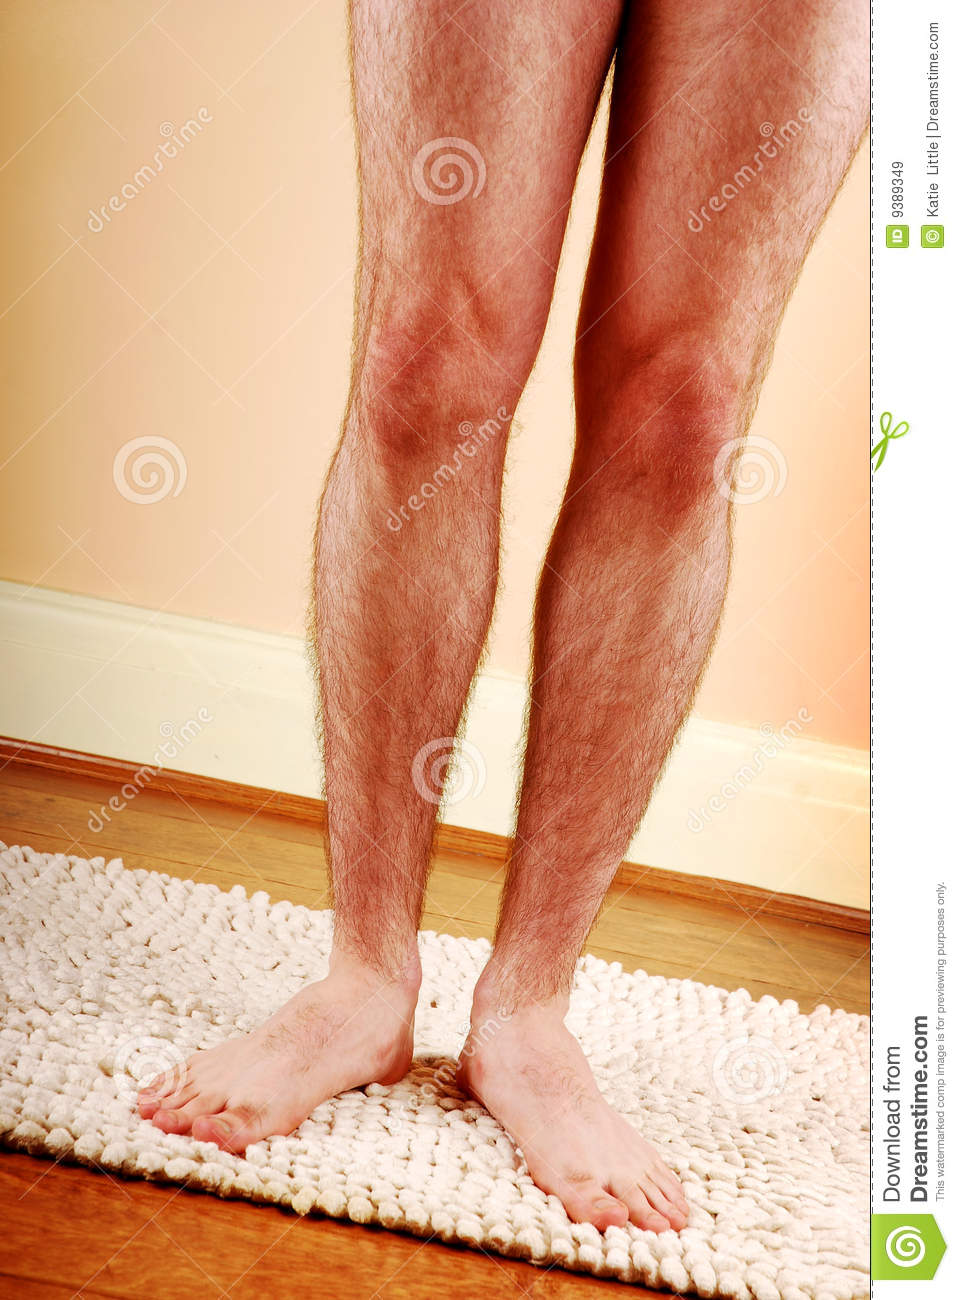 Man S Legs Royalty Free Stock Images   Image  9389349